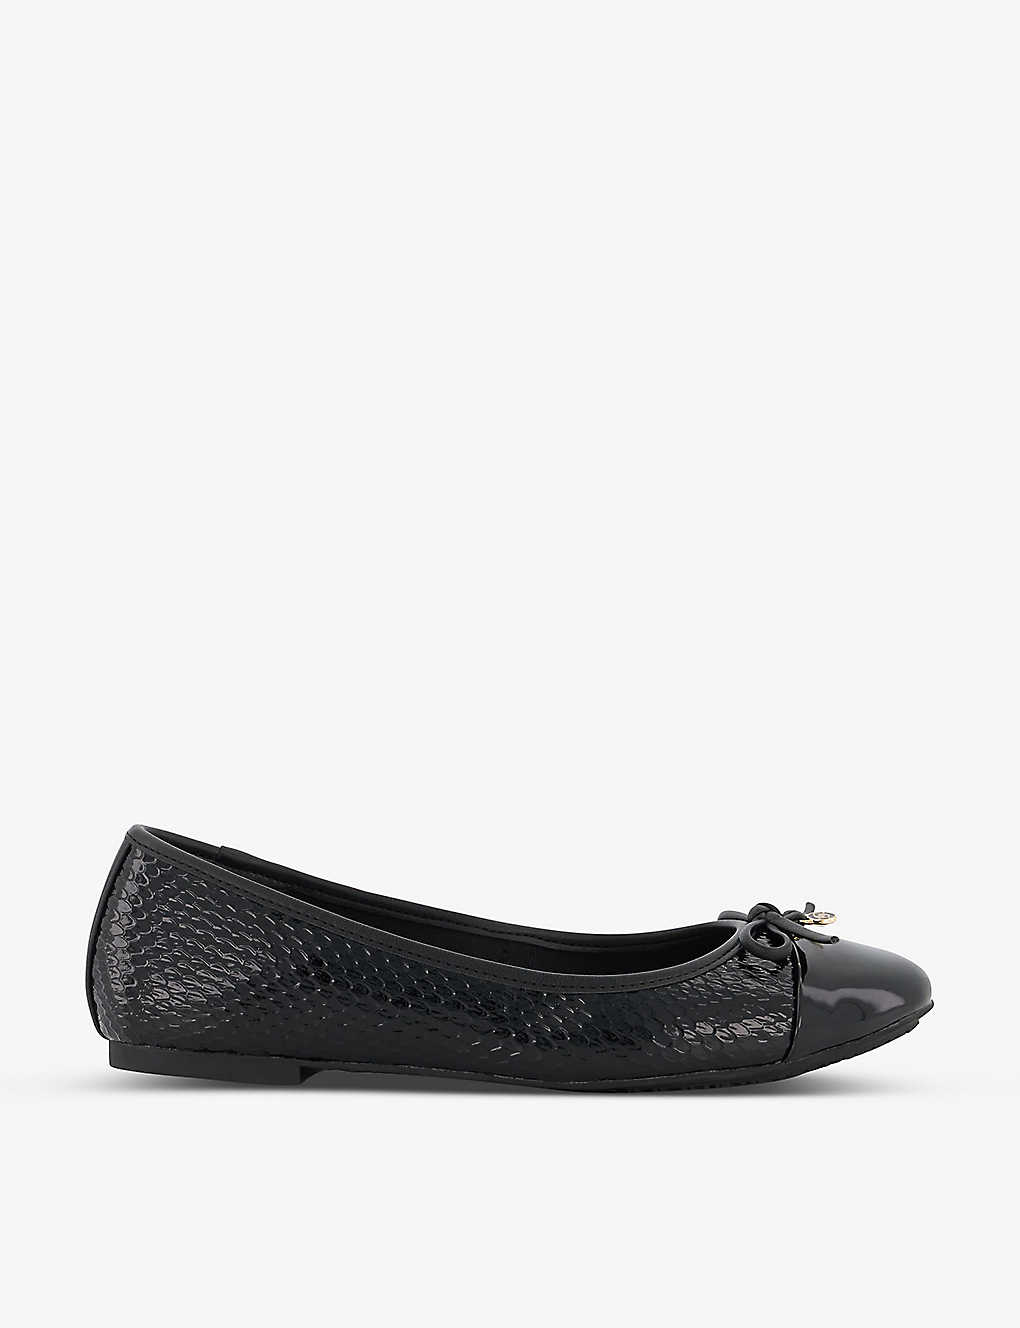 Dune Womens Black-synthetic Reptile Hallo Charm-embellished Mock-reptile Leather Ballet Pumps